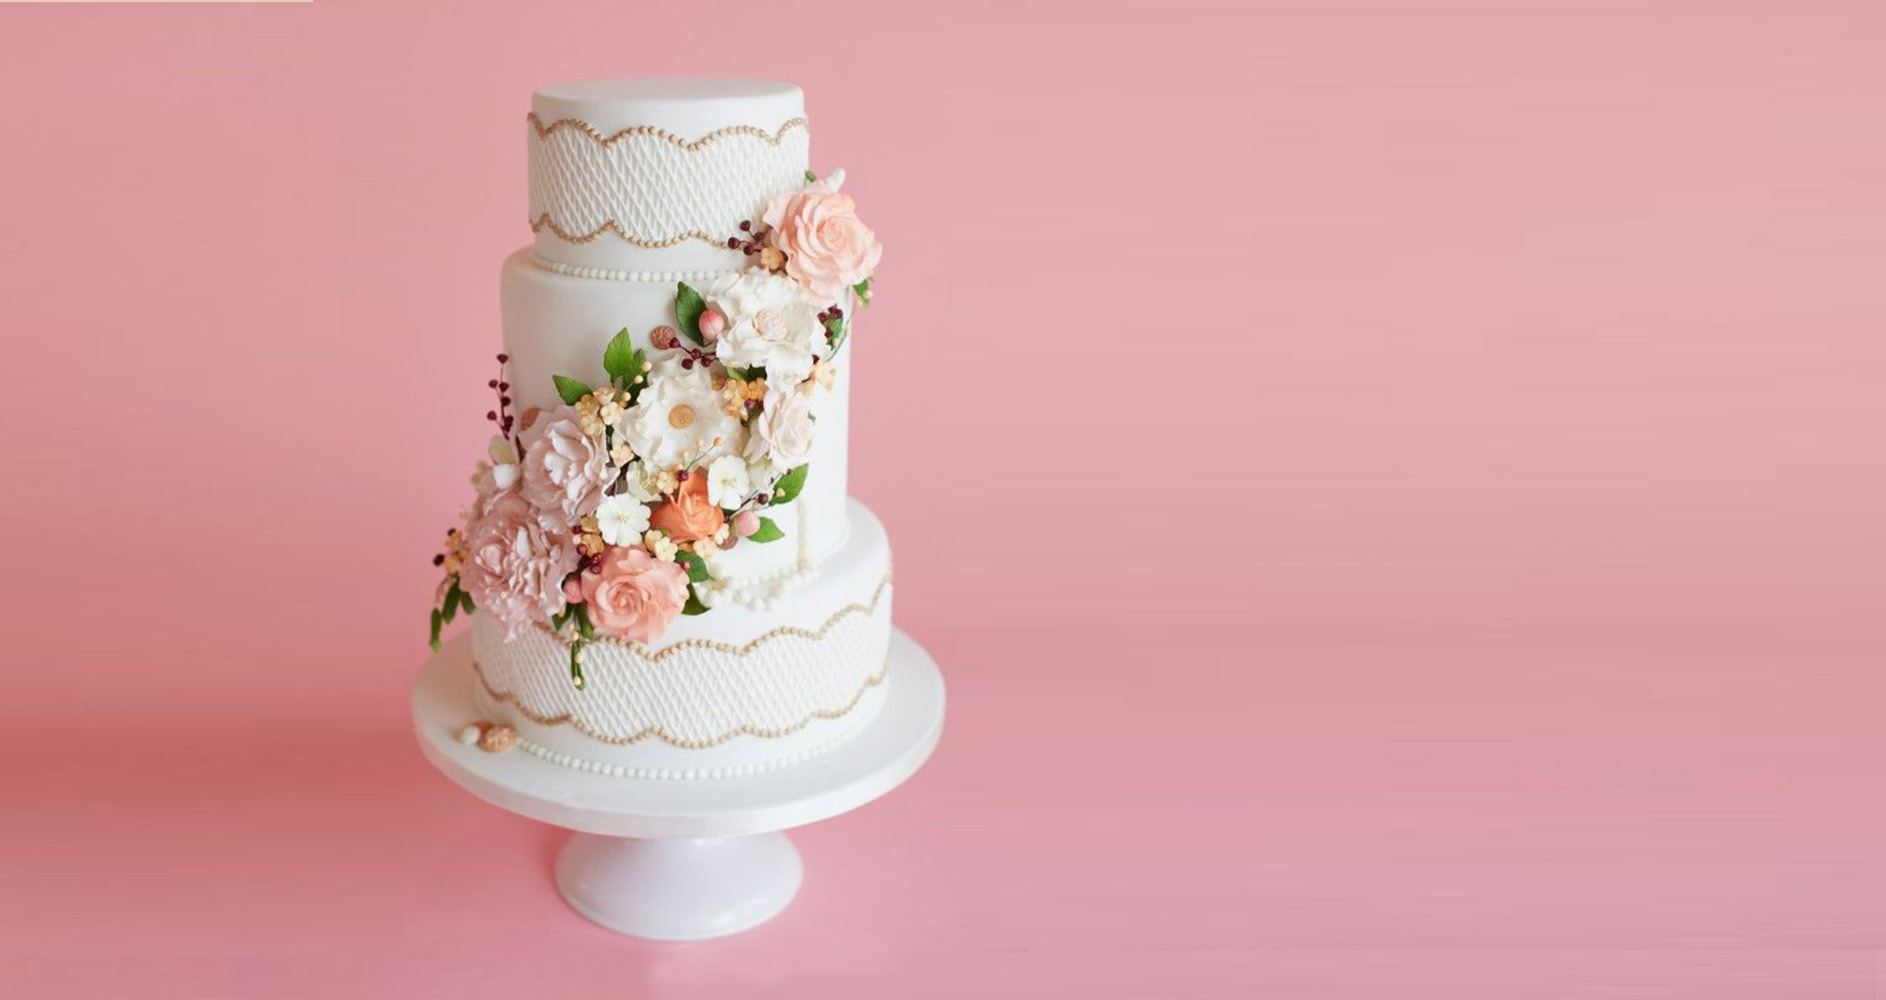 Wedding Cakes That Are Almost Too Pretty To Eat